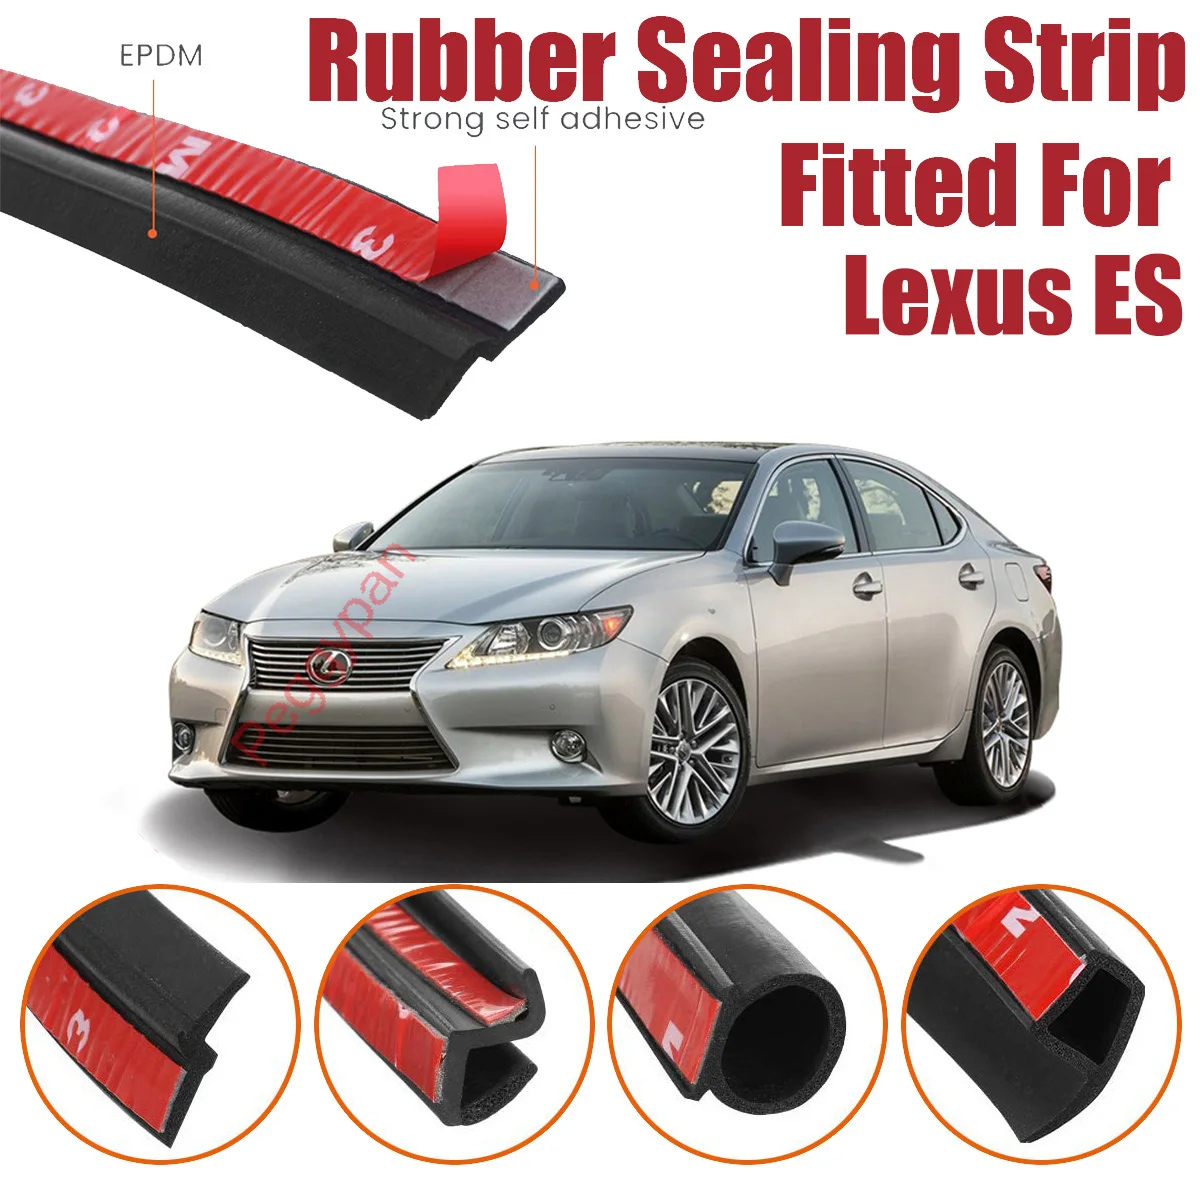 Door Seal Strip Kit Self Adhesive Window Engine Cover Soundproof Rubber Weather Draft Wind Noise Reduction For Lexus ES